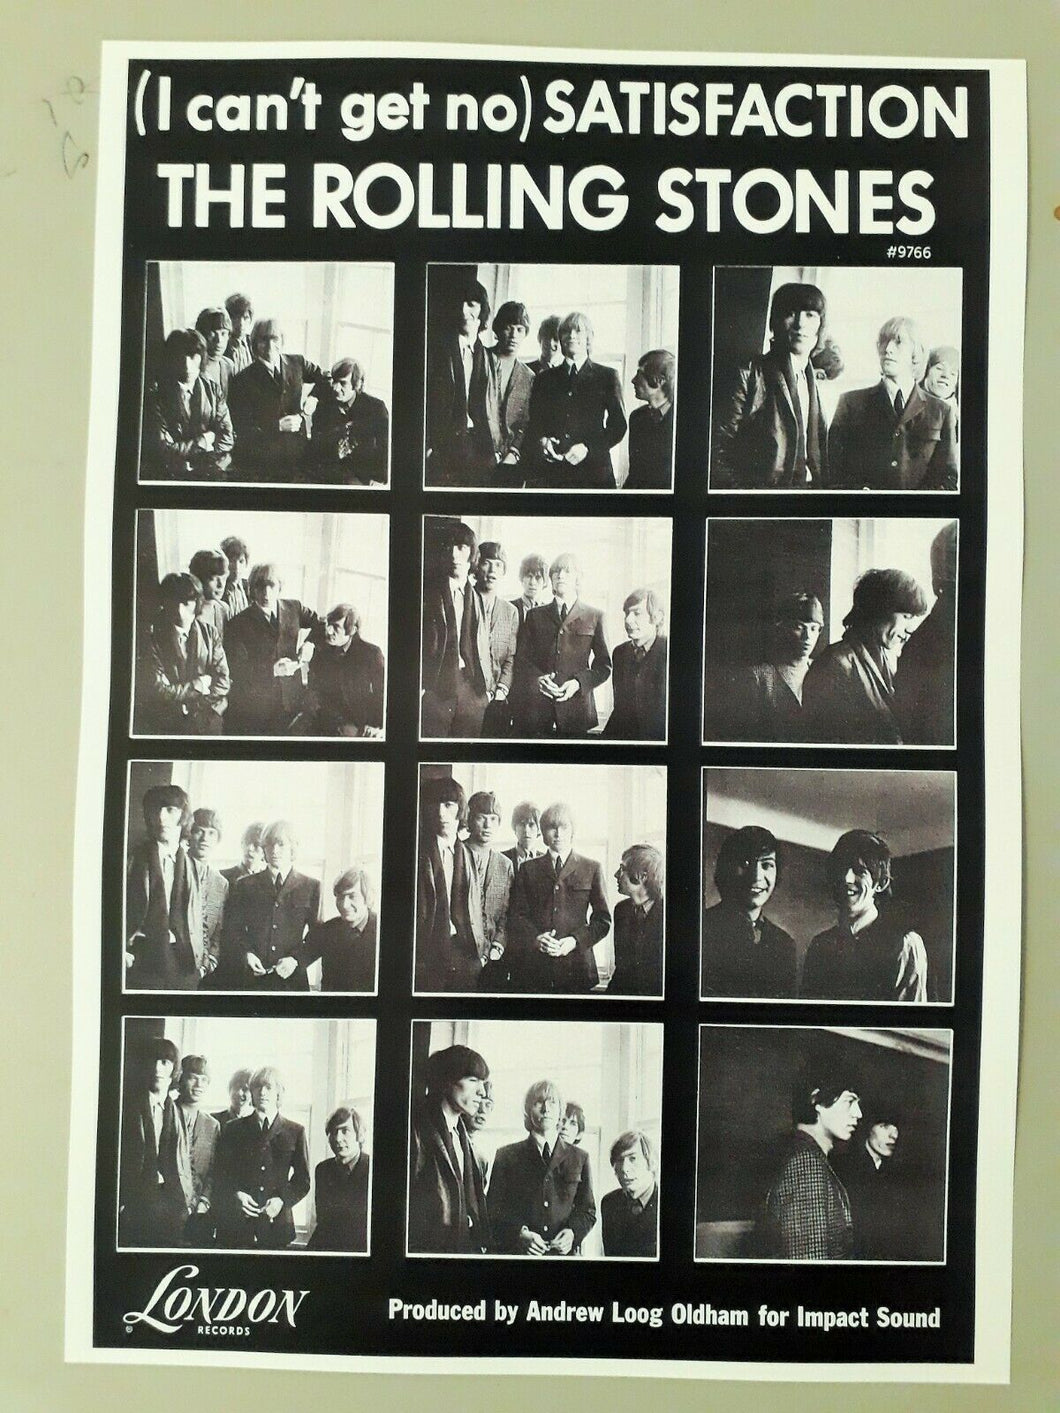 Rolling Stones promotional poster - Satisfaction 1965 reprinted edition A3 size - Original Music and Movie Posters for sale from Bamalama - Online Poster Store UK London